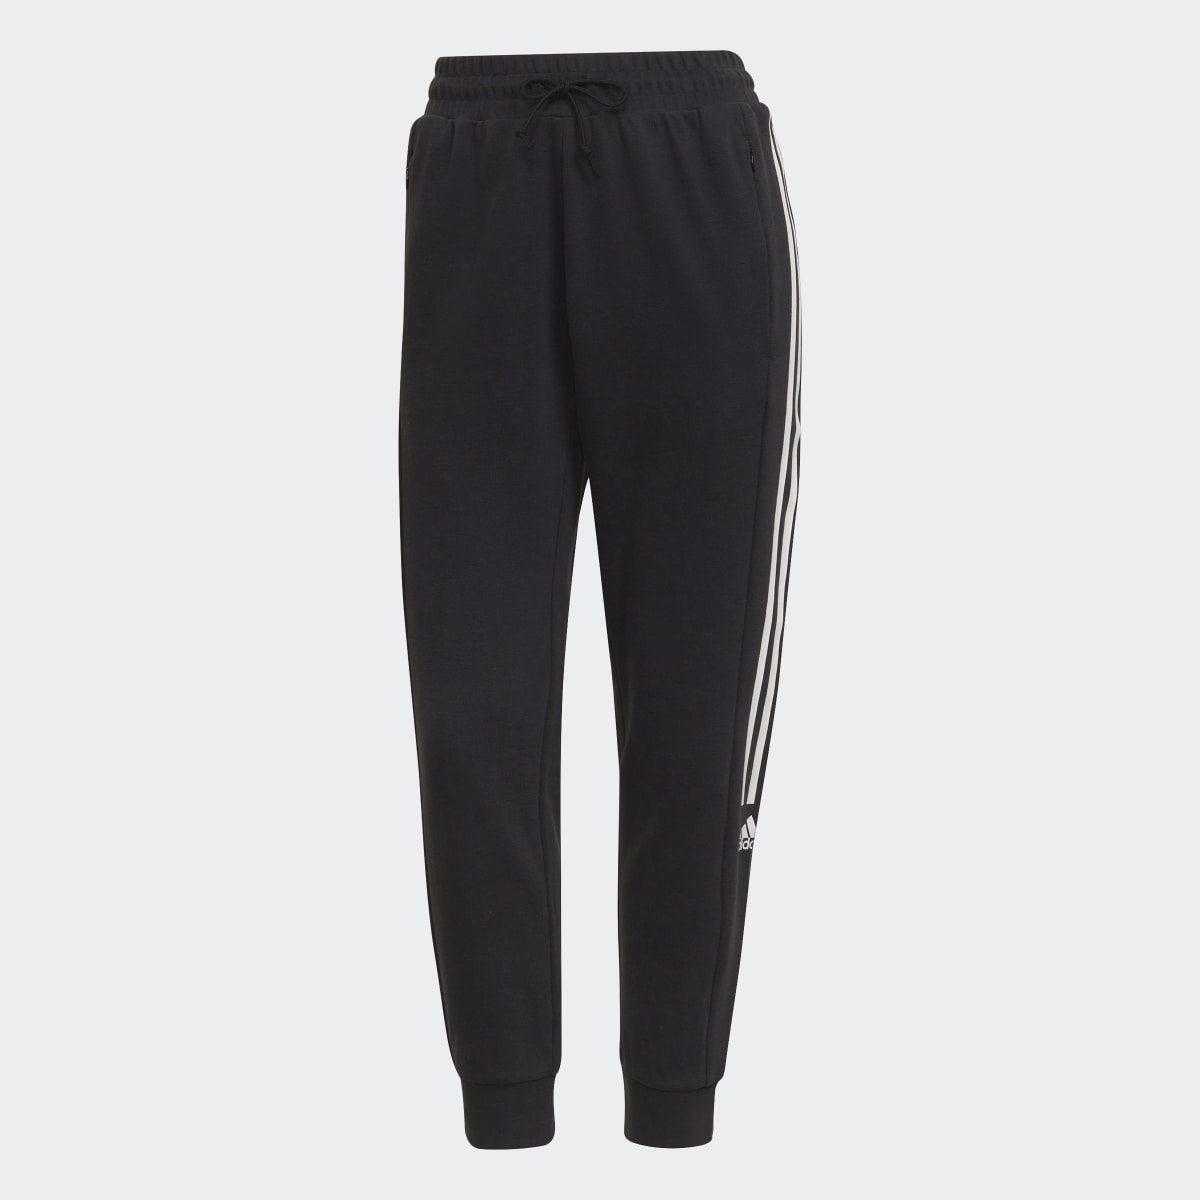 Adidas AEROREADY Made for Training Cotton-Touch Joggers. 4